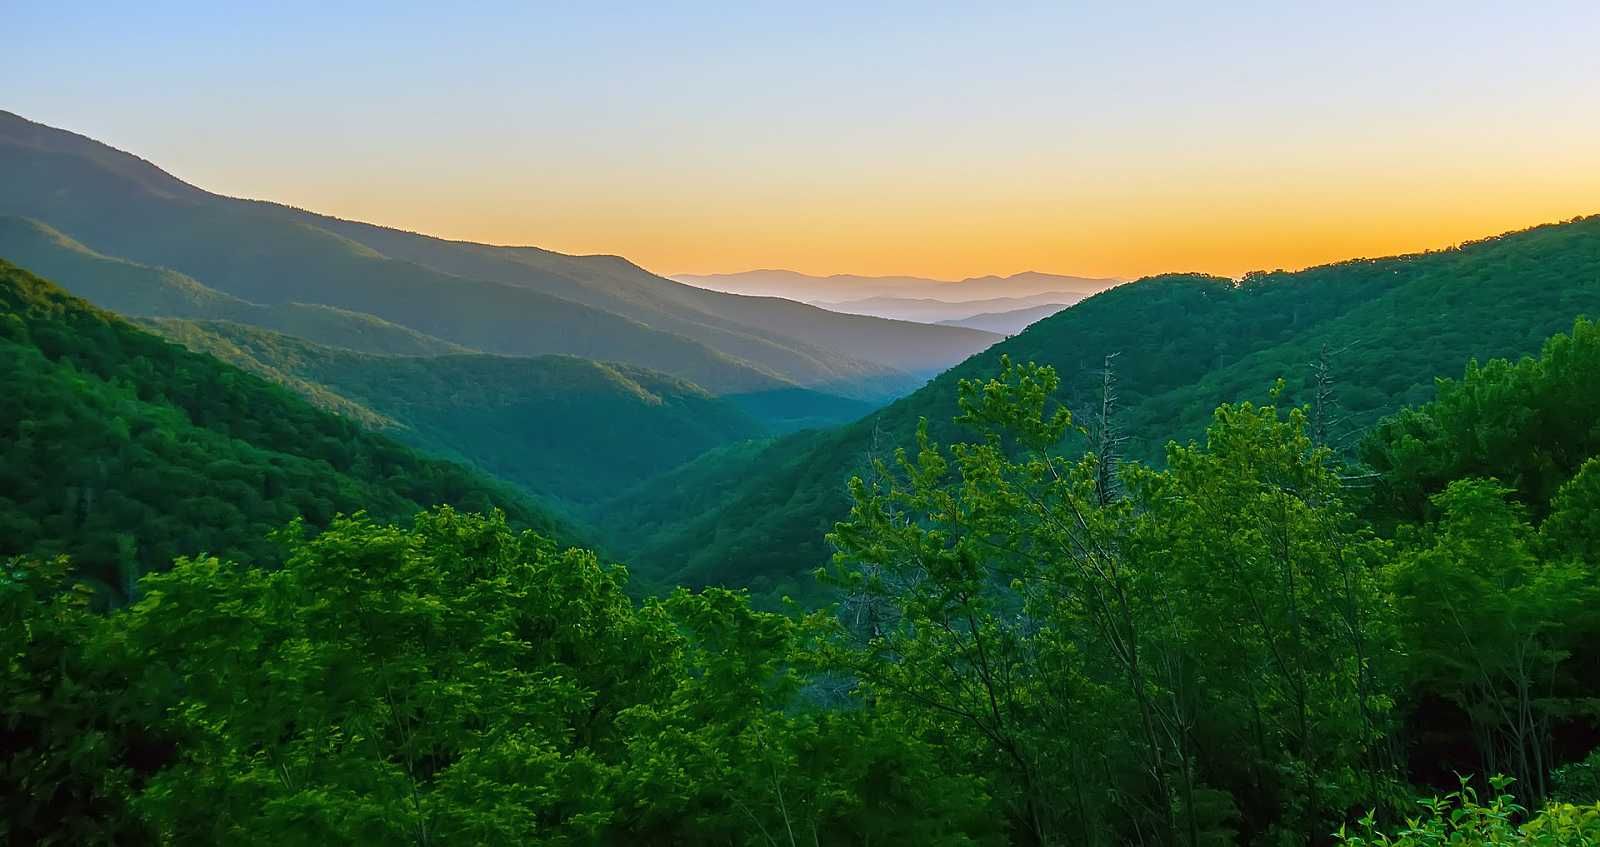 A view of a valley filled with trees and mountains at sunset.